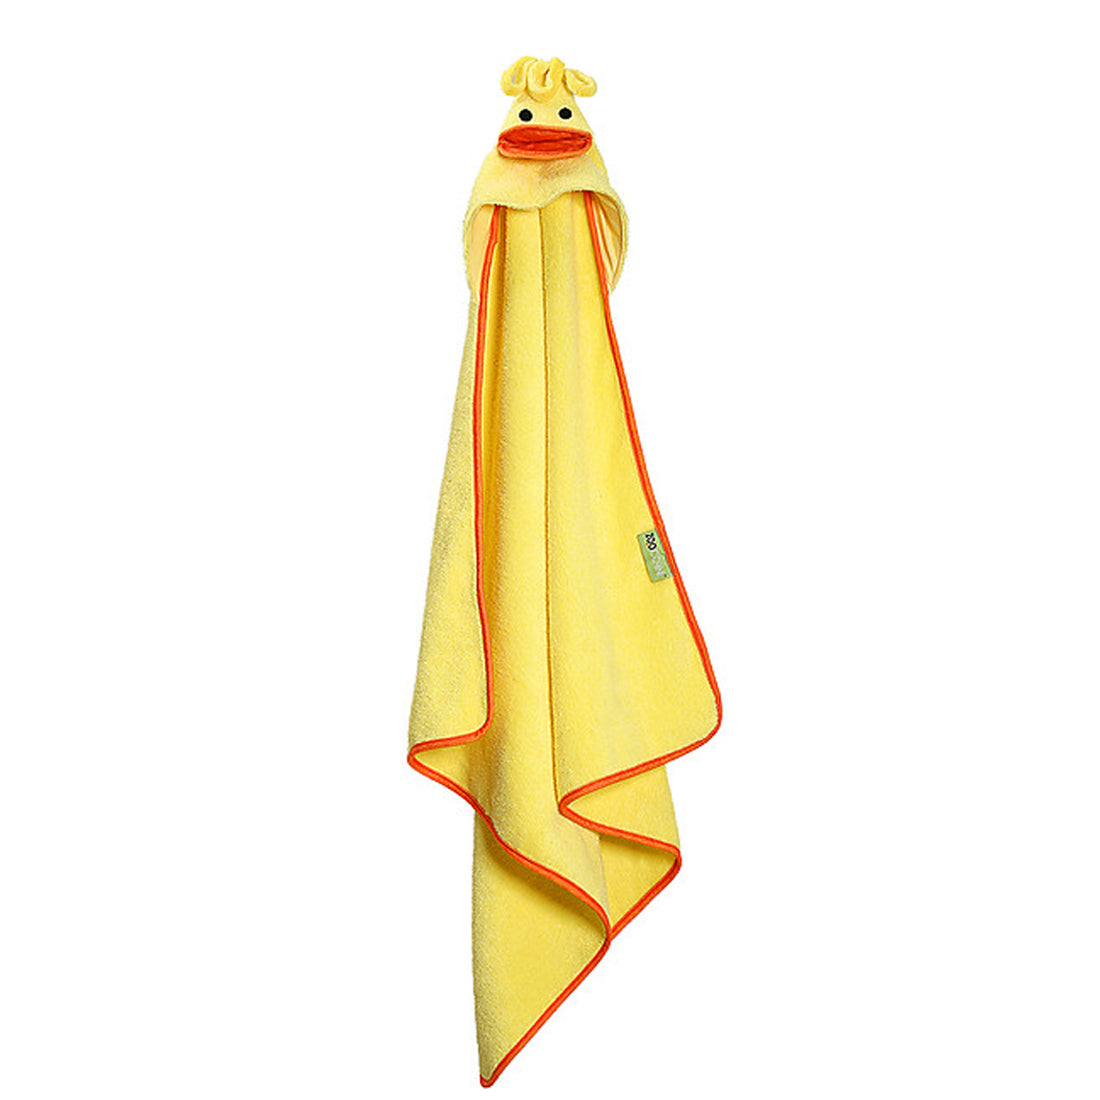 Baby Plush Terry Hooded Bath Towel - Puddles the Duck